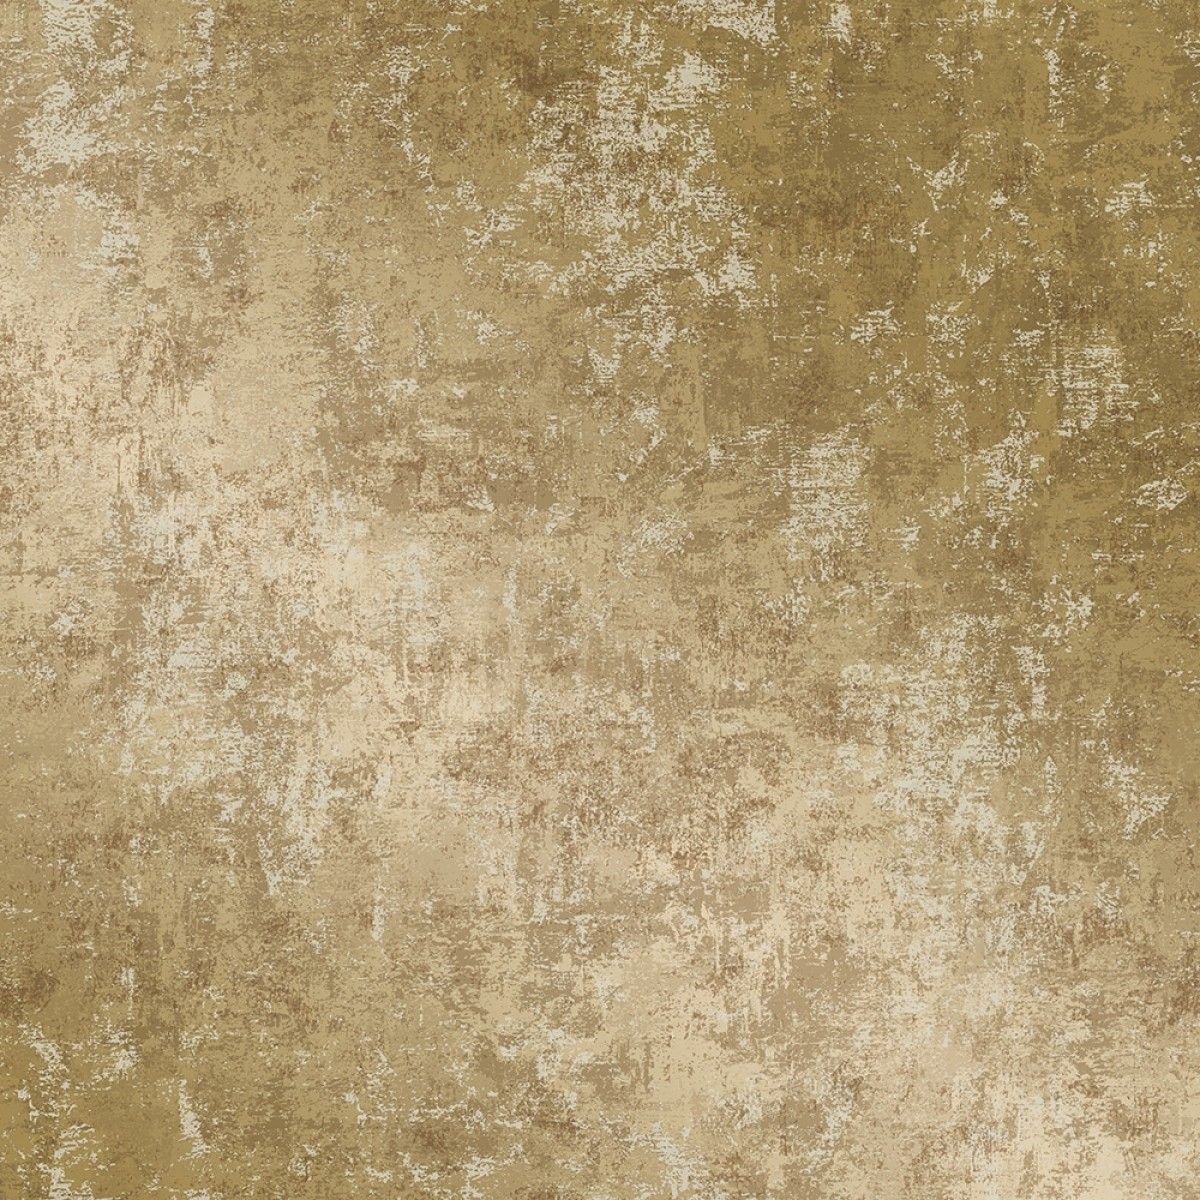 Gold Leaf Wallpapers - Wallpaper Cave